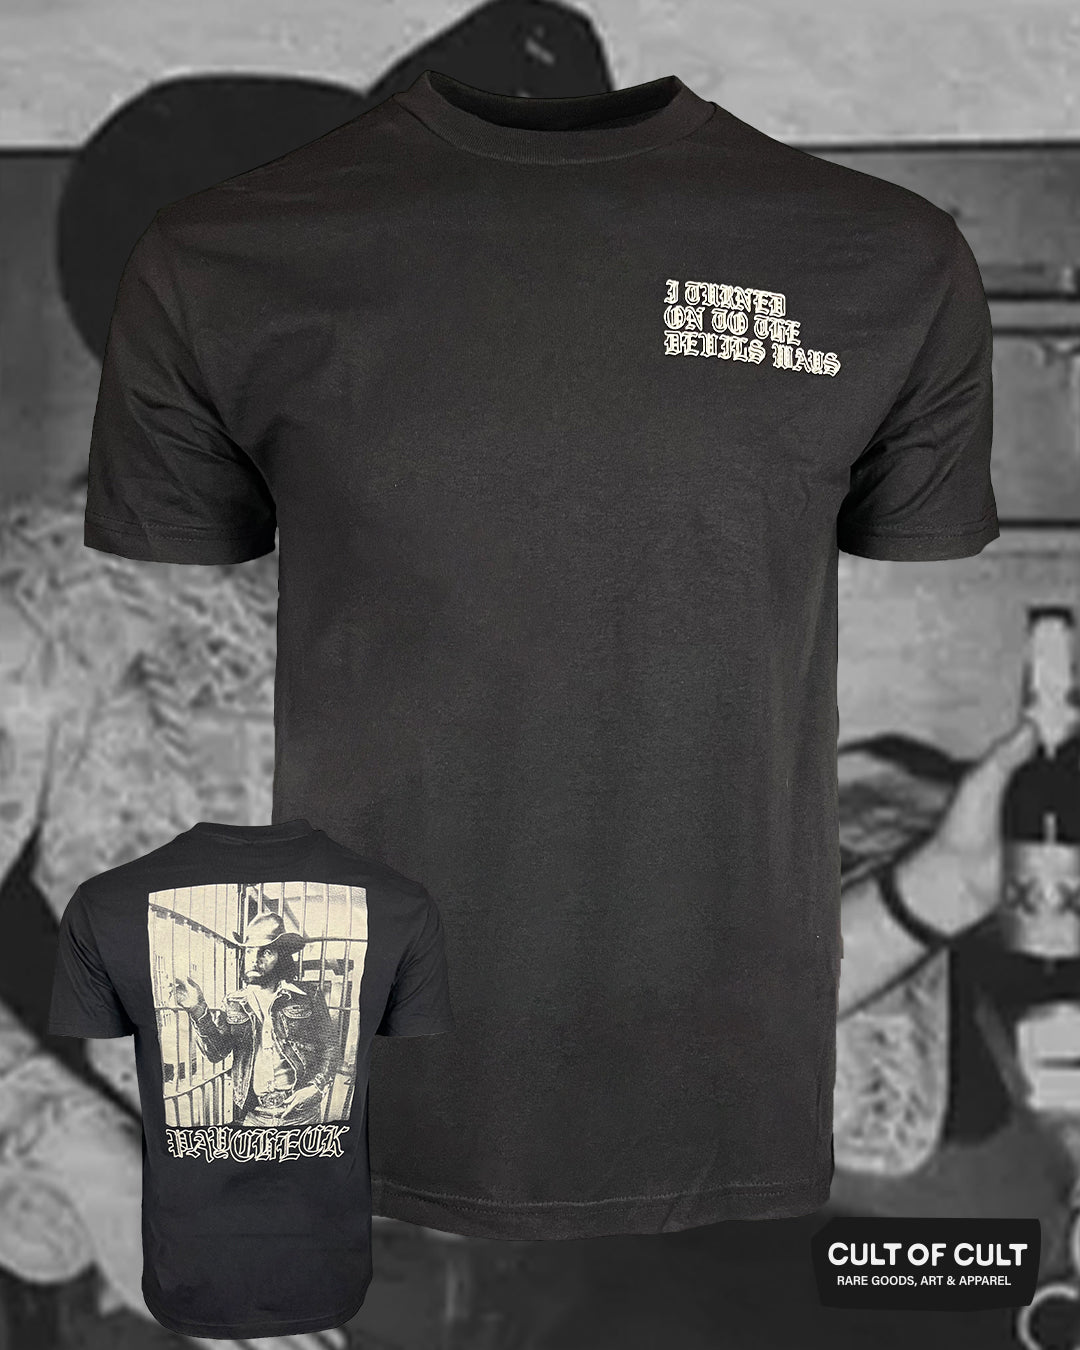 Johnny Paycheck Devils Ways Tee Black Front and Back